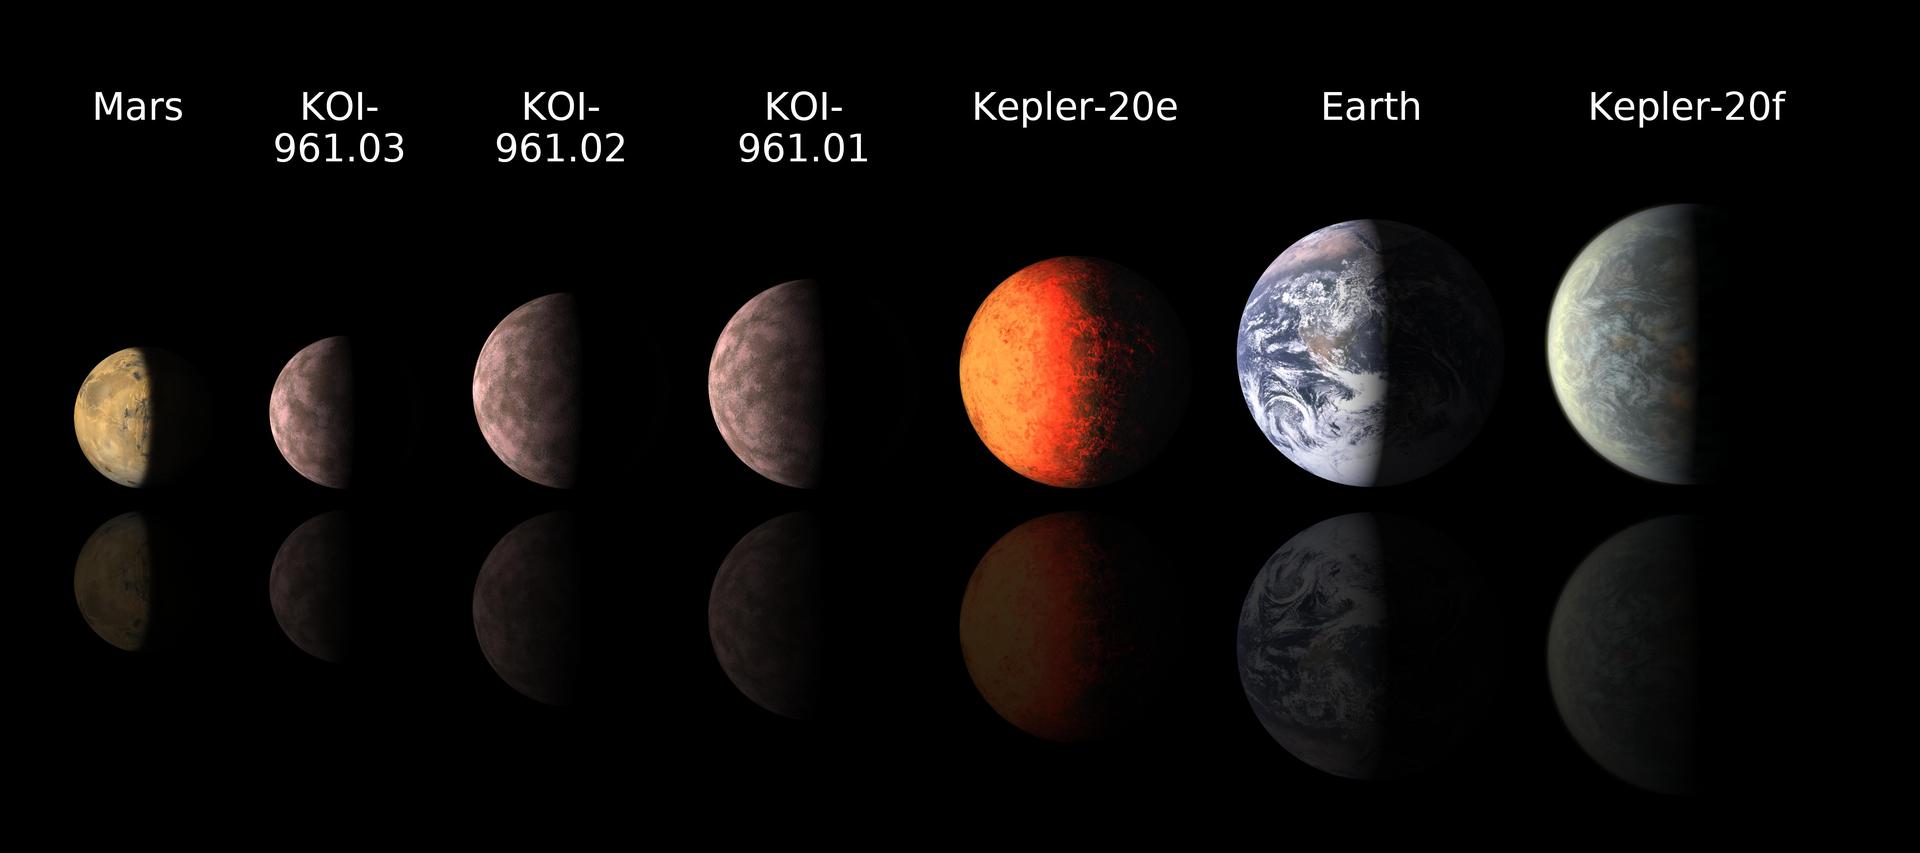 Astronomers using data from NASA Kepler mission and ground-based telescopes recently discovered the three smallest exoplanets known to circle another star, called KOI-961.01, KOI-961.02 and KOI-961.03.